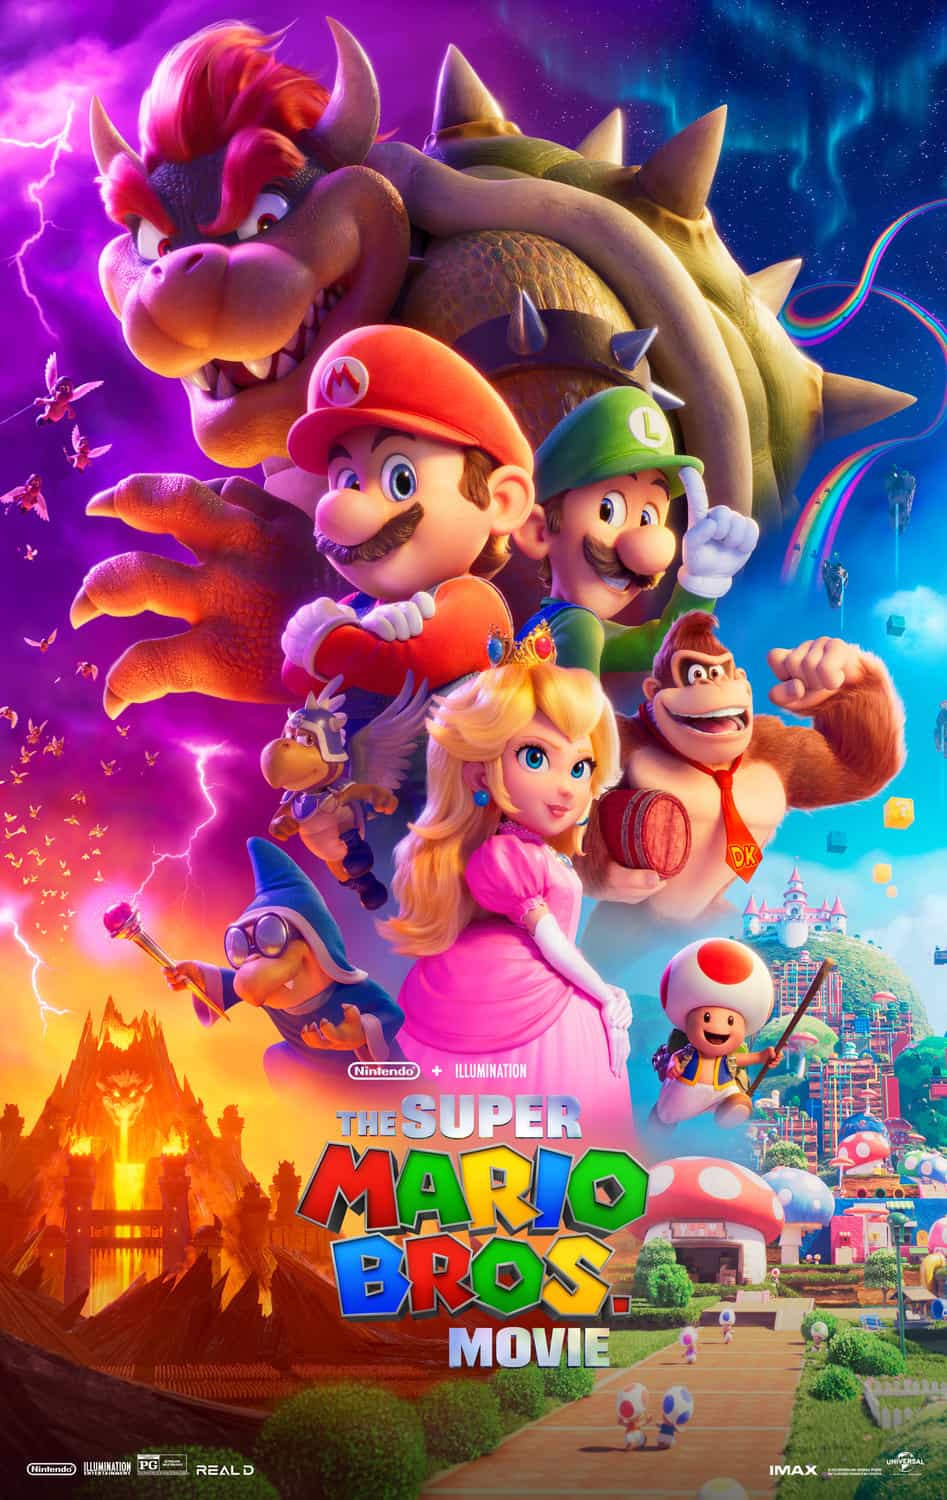 US Box Office Weekend Report 7th - 9th April 2023:  Super Mario Bros. Movie makes its debut with $204 Million, the highest debut for an animated feature